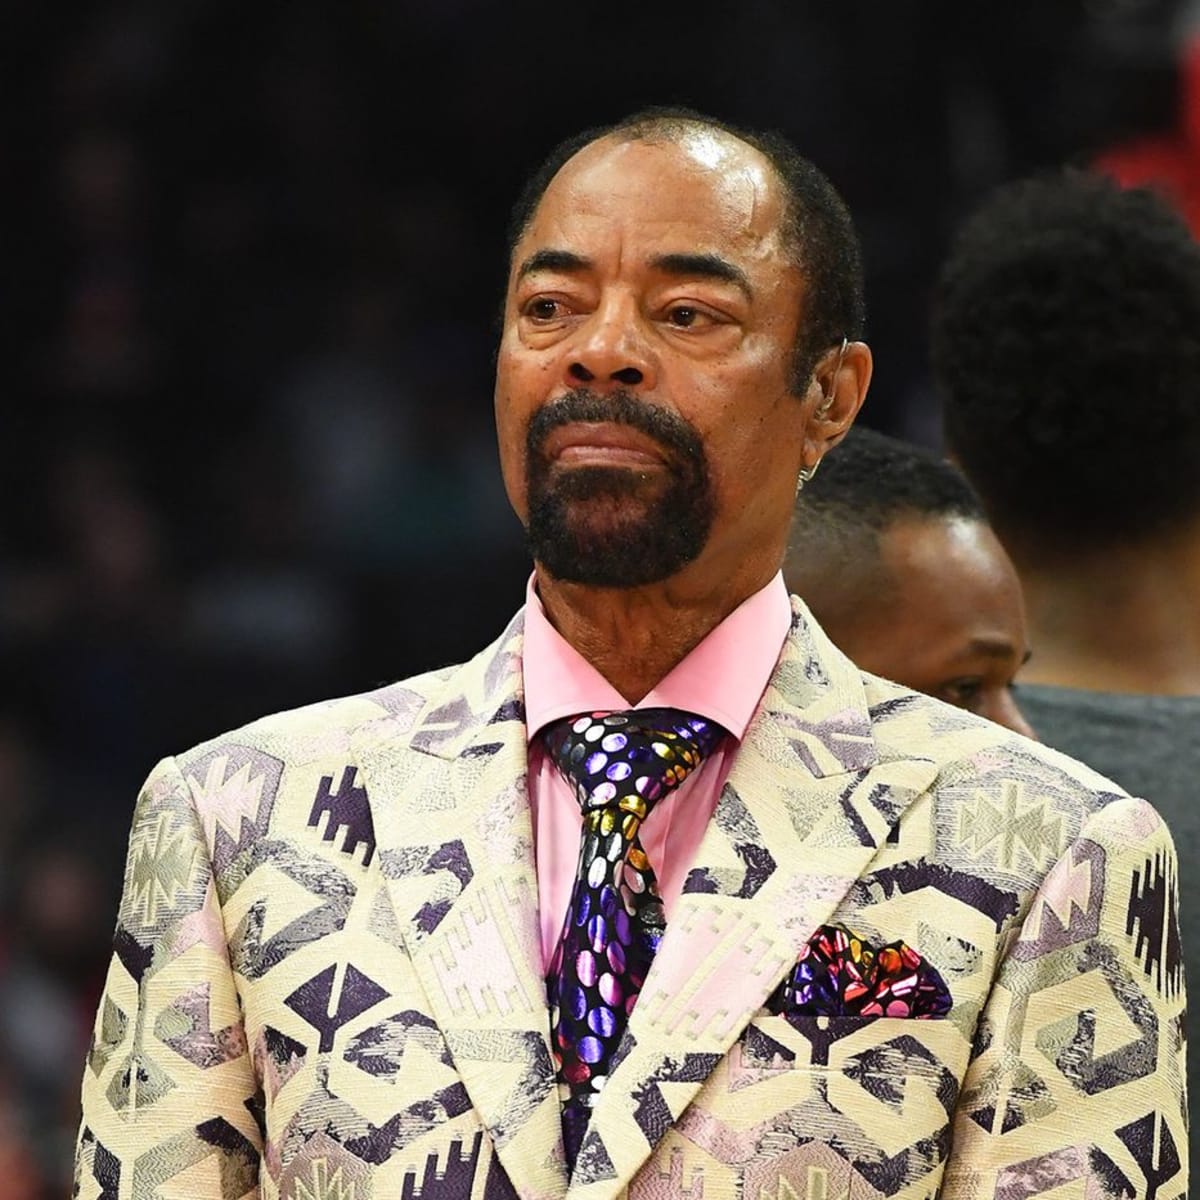 NBA Legend Walt Frazier honored with renaming of Atlanta gym